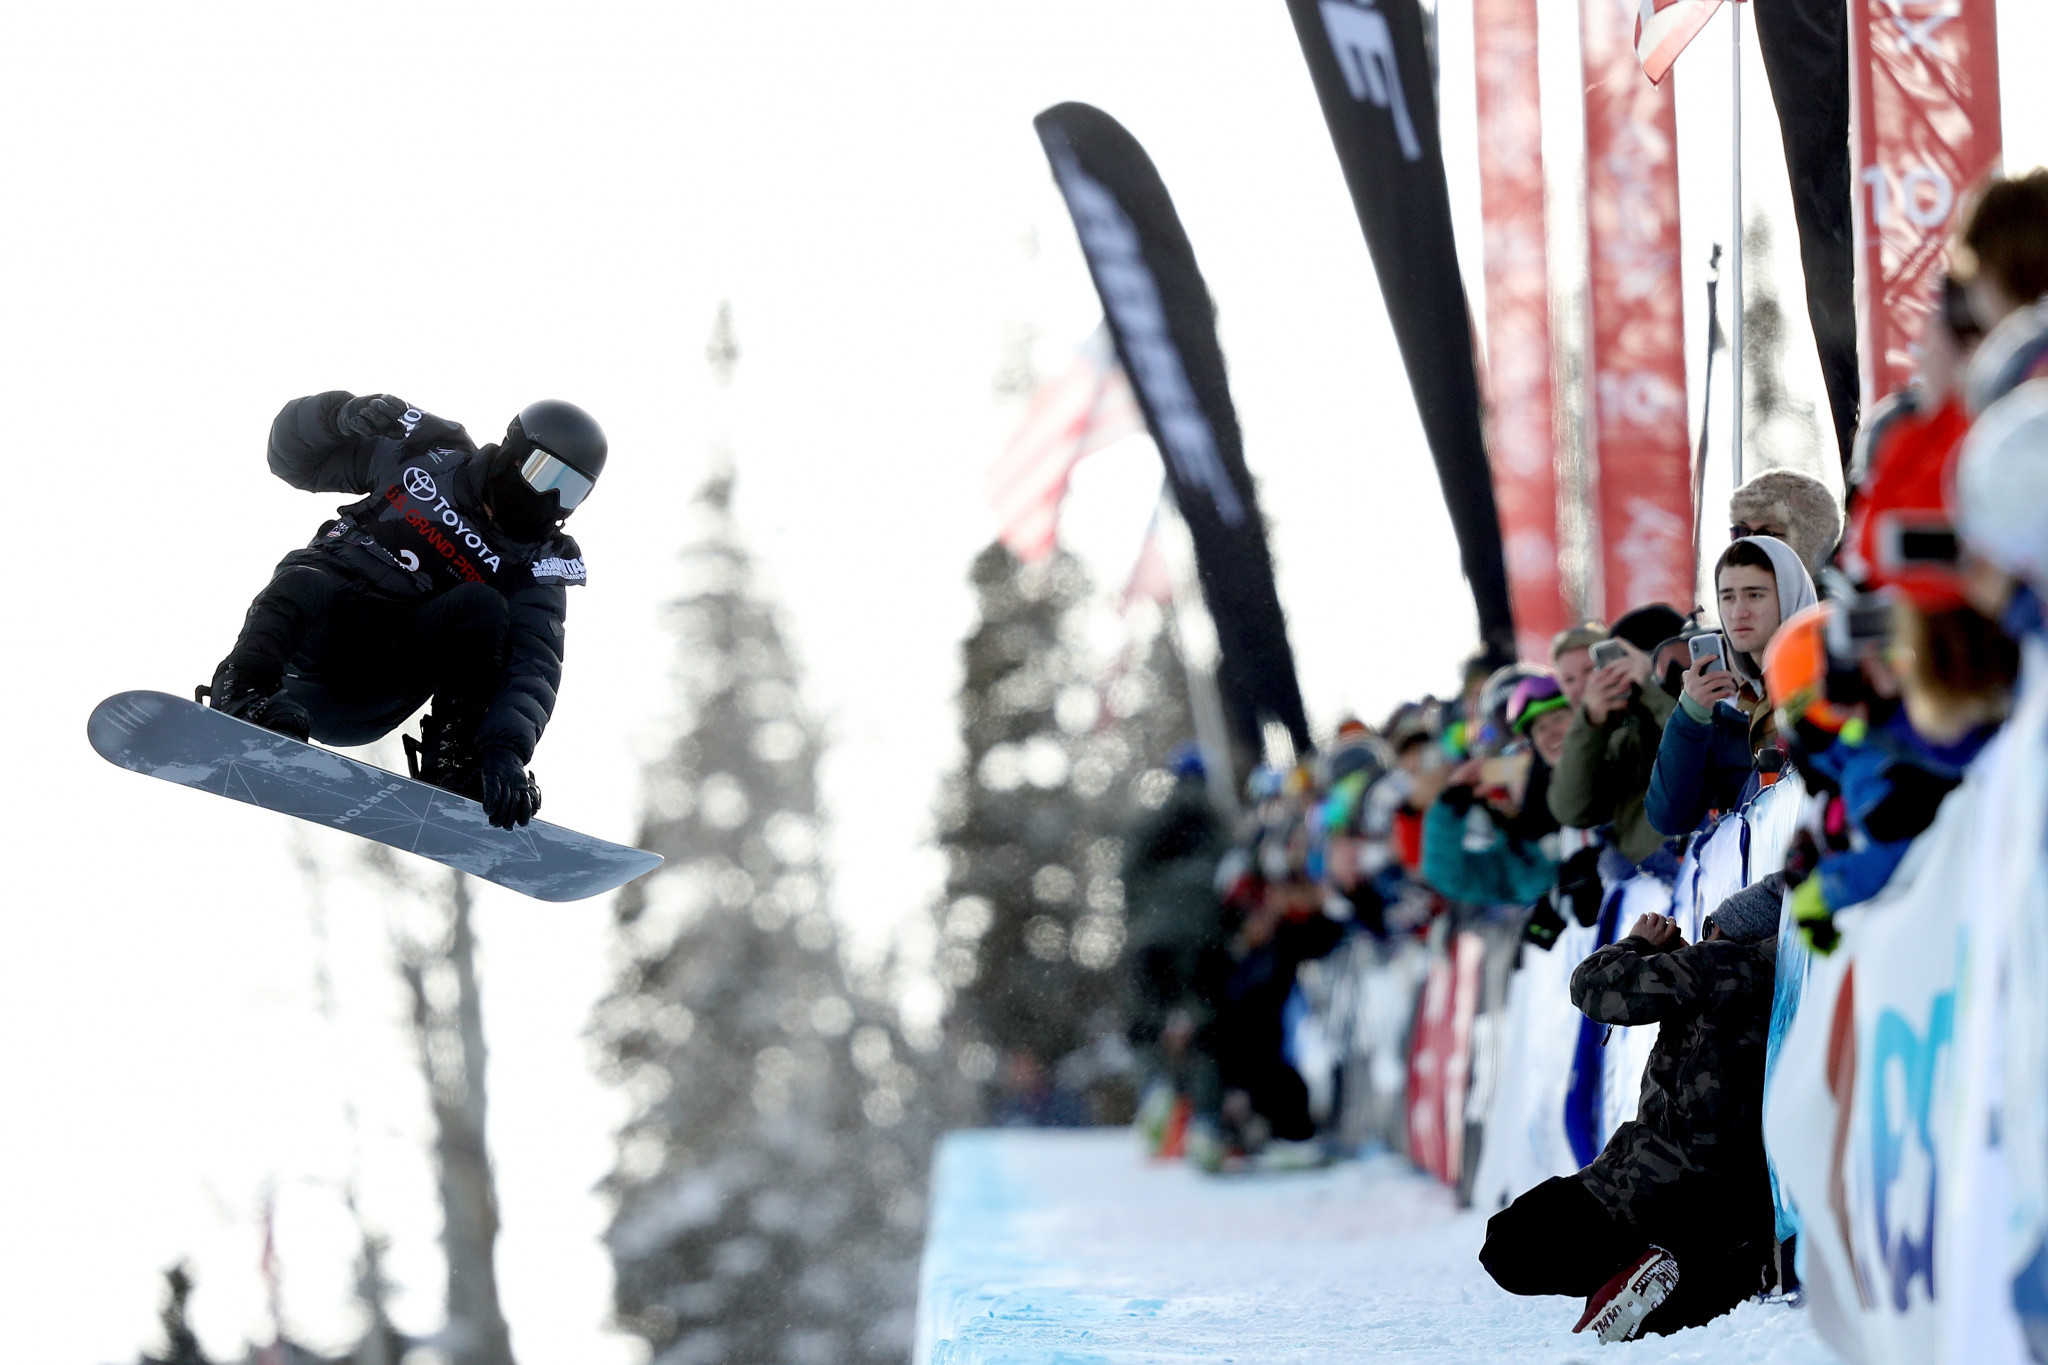 Shaun White has confirmed his place on the United States team for the Pyeongchang 2018 Winter Olympic Games after posting a perfect score to win today’s men’s halfpipe event at the FIS Snowboard Freestyle World Cup in Snowmass ©Getty Images